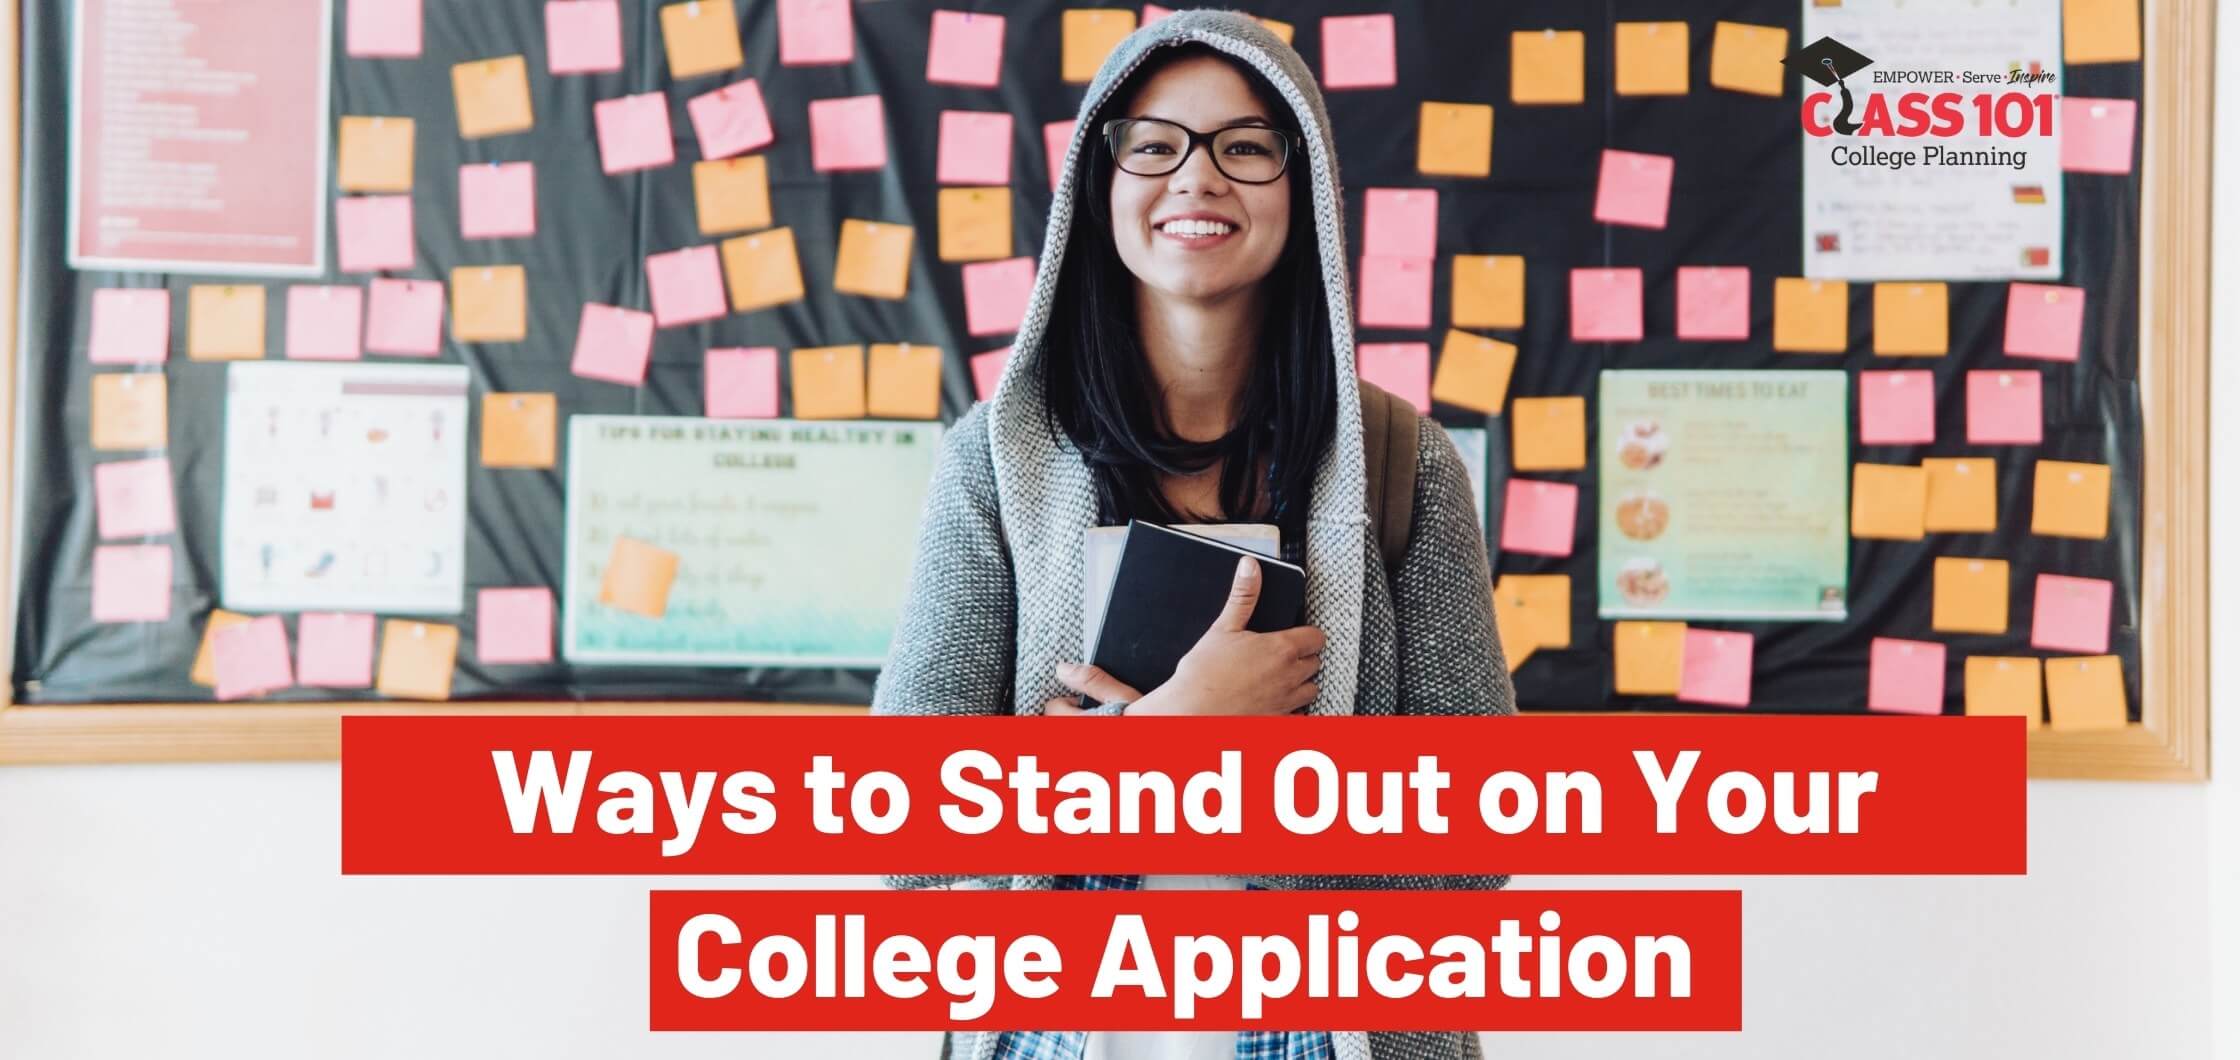 How to Stand Out on College Applications